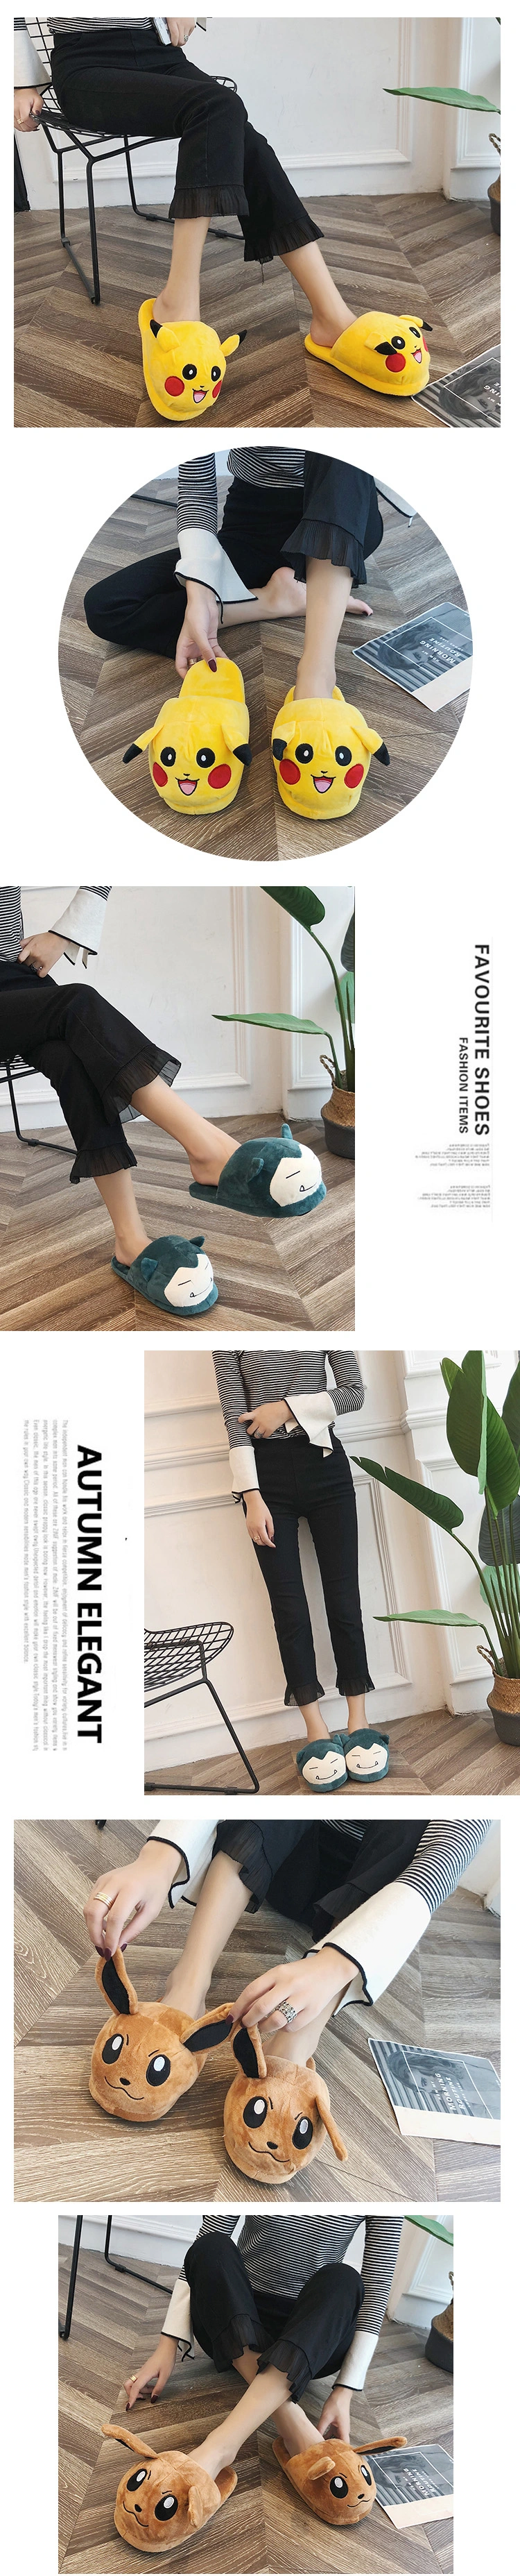 2020 Hot Sales Kids Slipper Fashion Girls Sandals Women Indoor Slippers Rubber Bottom Cute Home Shoes